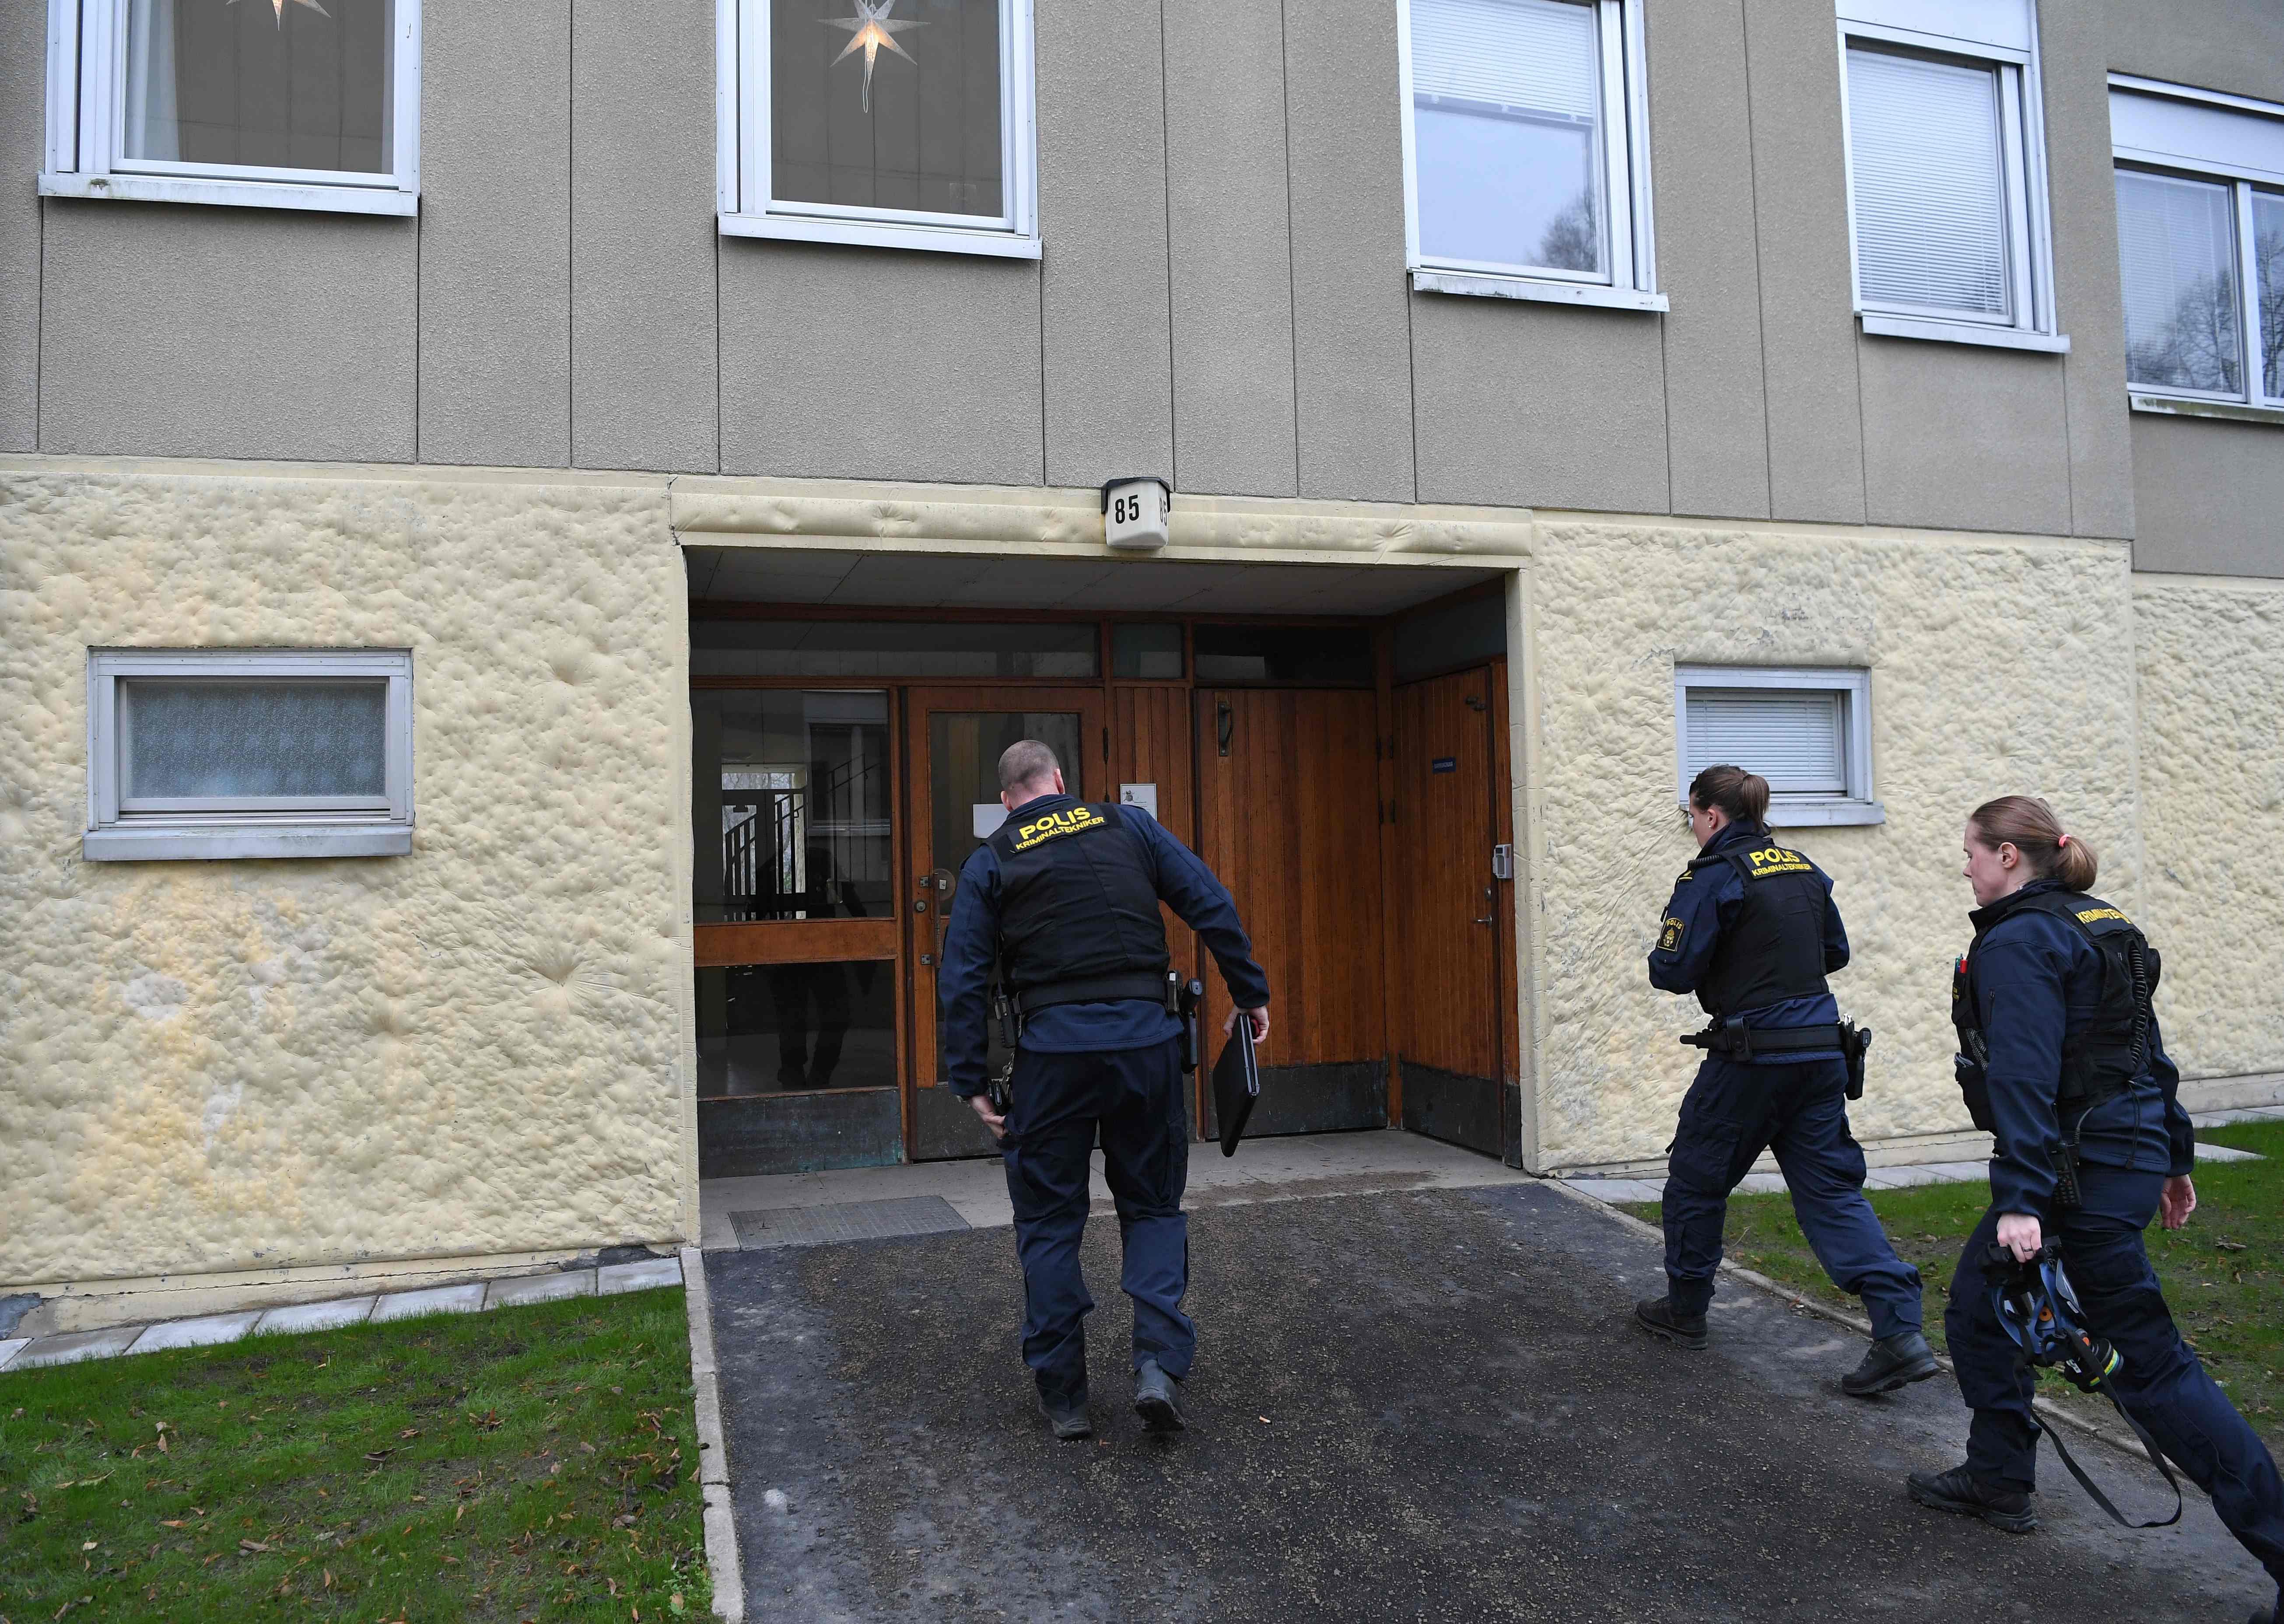  A mother in Sweden has been arrested on suspicion of locking her son inside their apartment for 28 years, leaving him undernourished and with almost no teeth, police and media reports said. Credit: AFP Photo